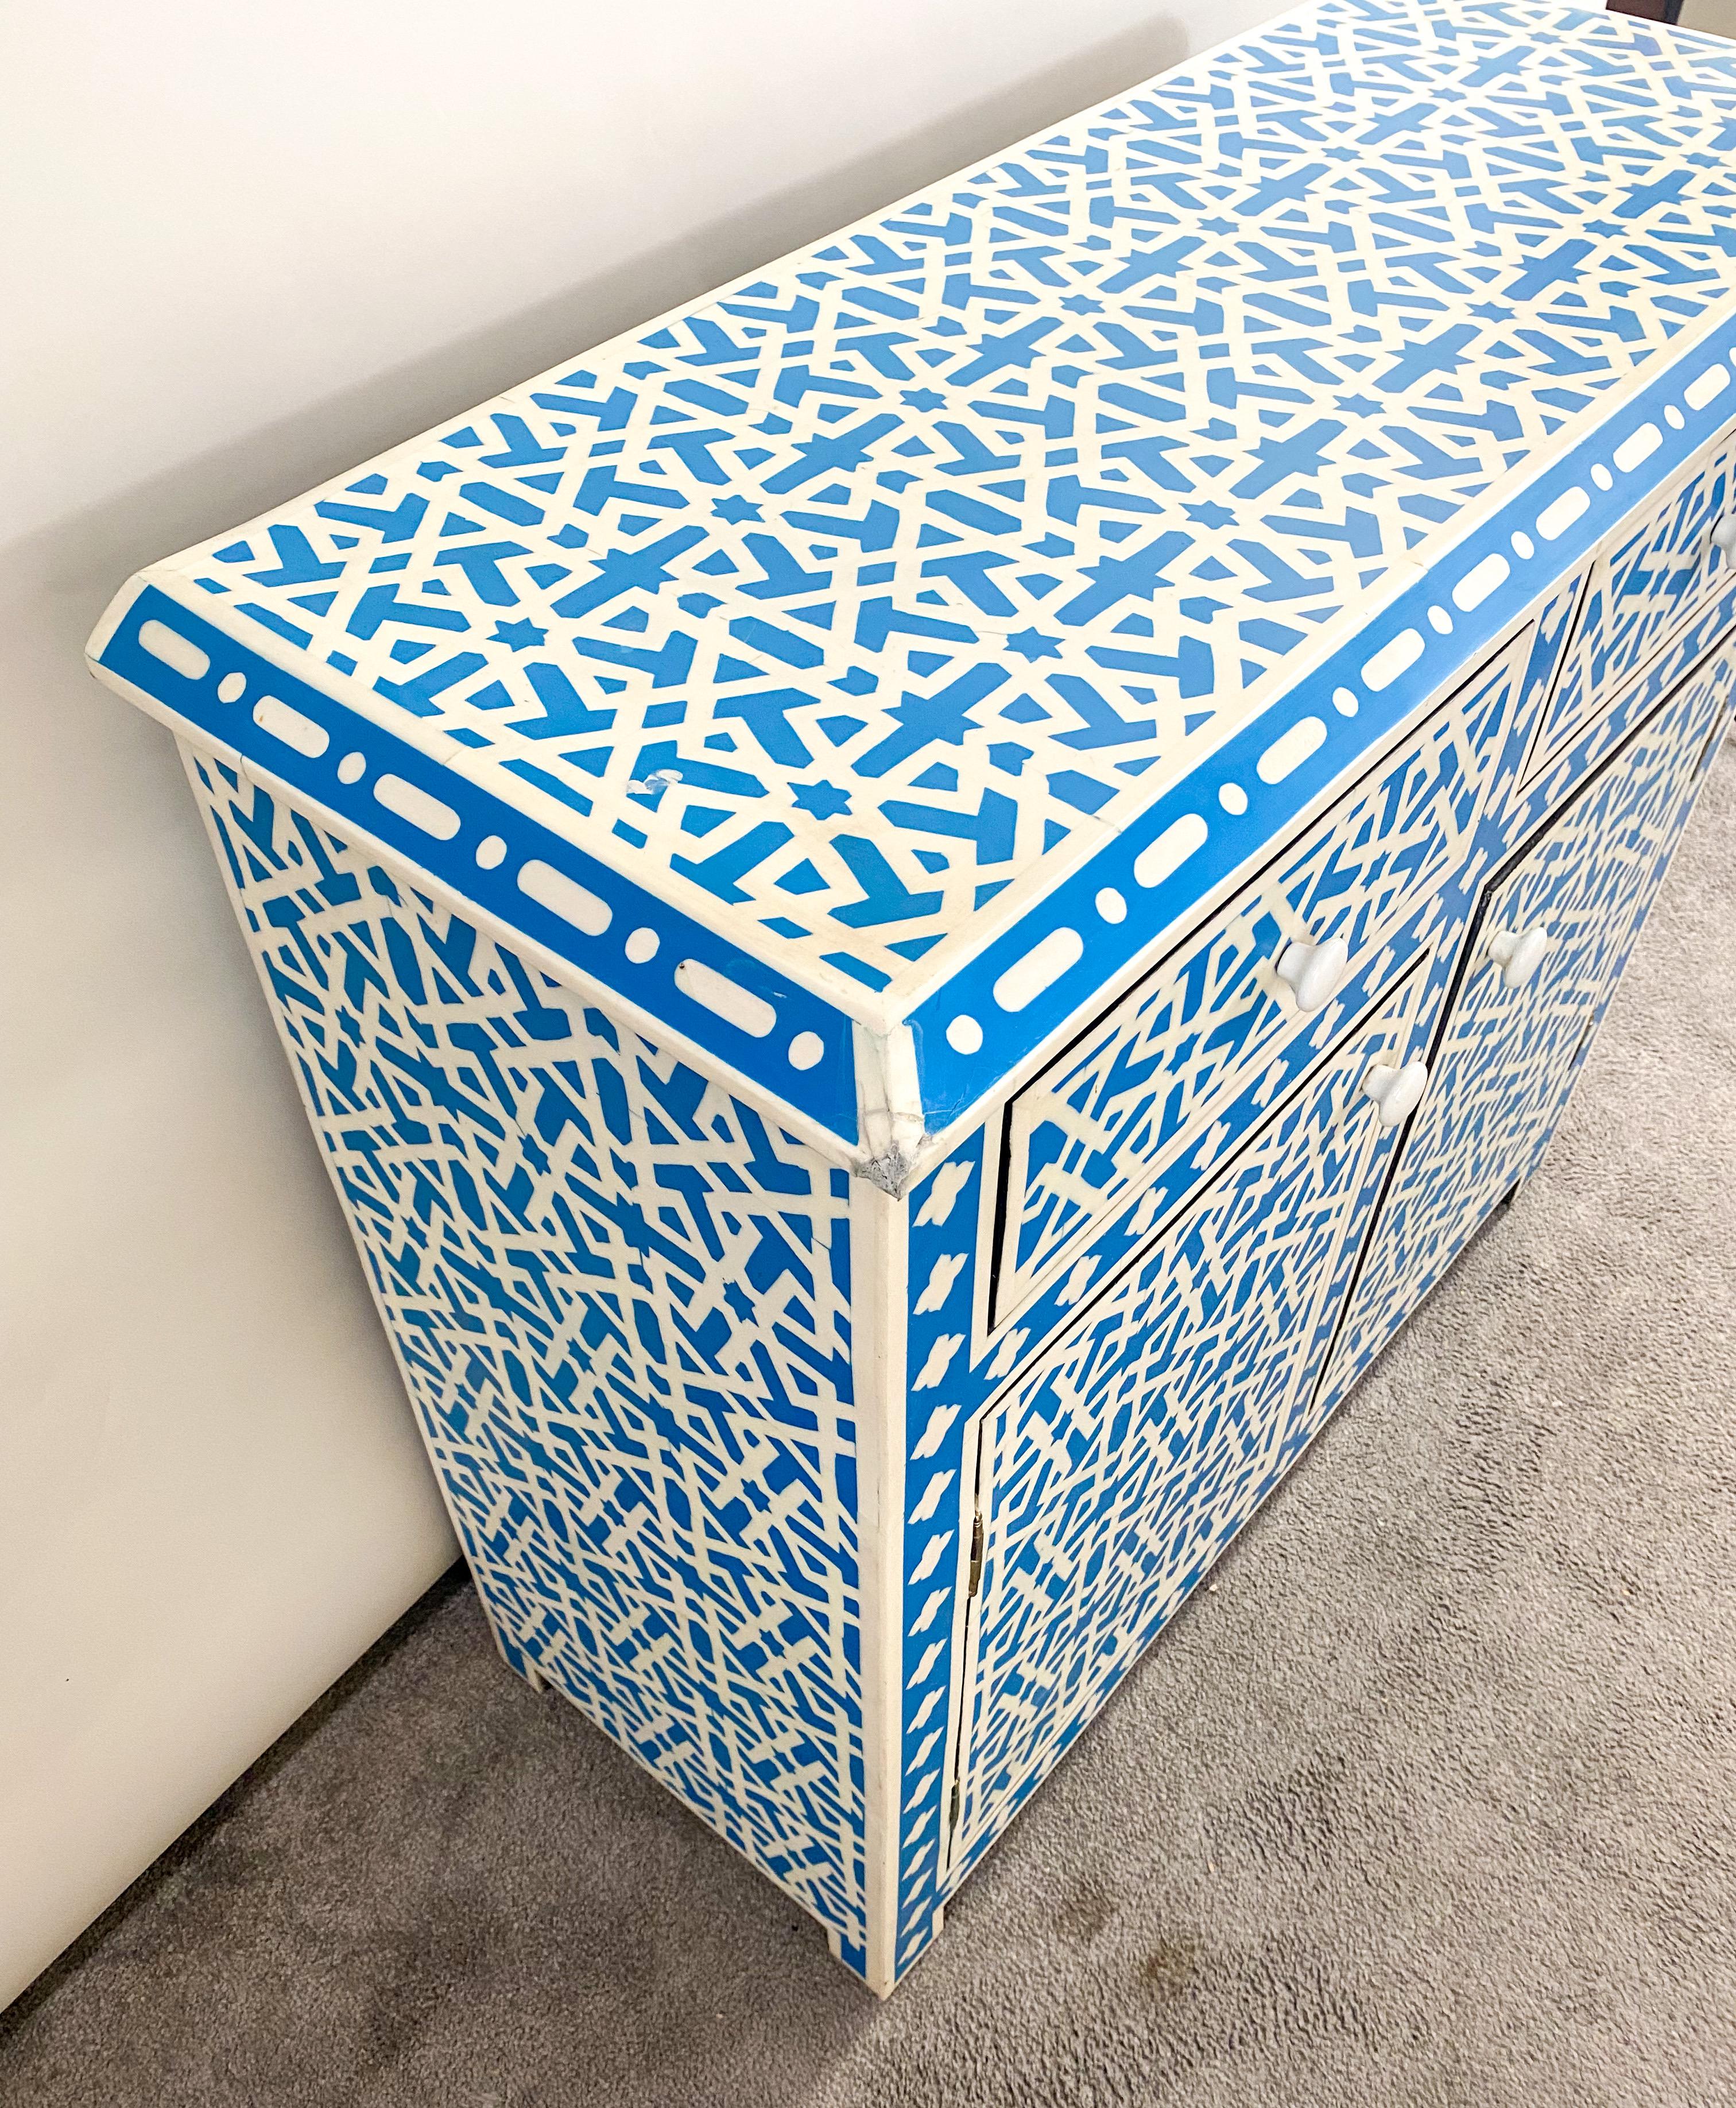 Boho Chic White & Blue Resin Geometrical Design Two Door Cabinet or Console  For Sale 4